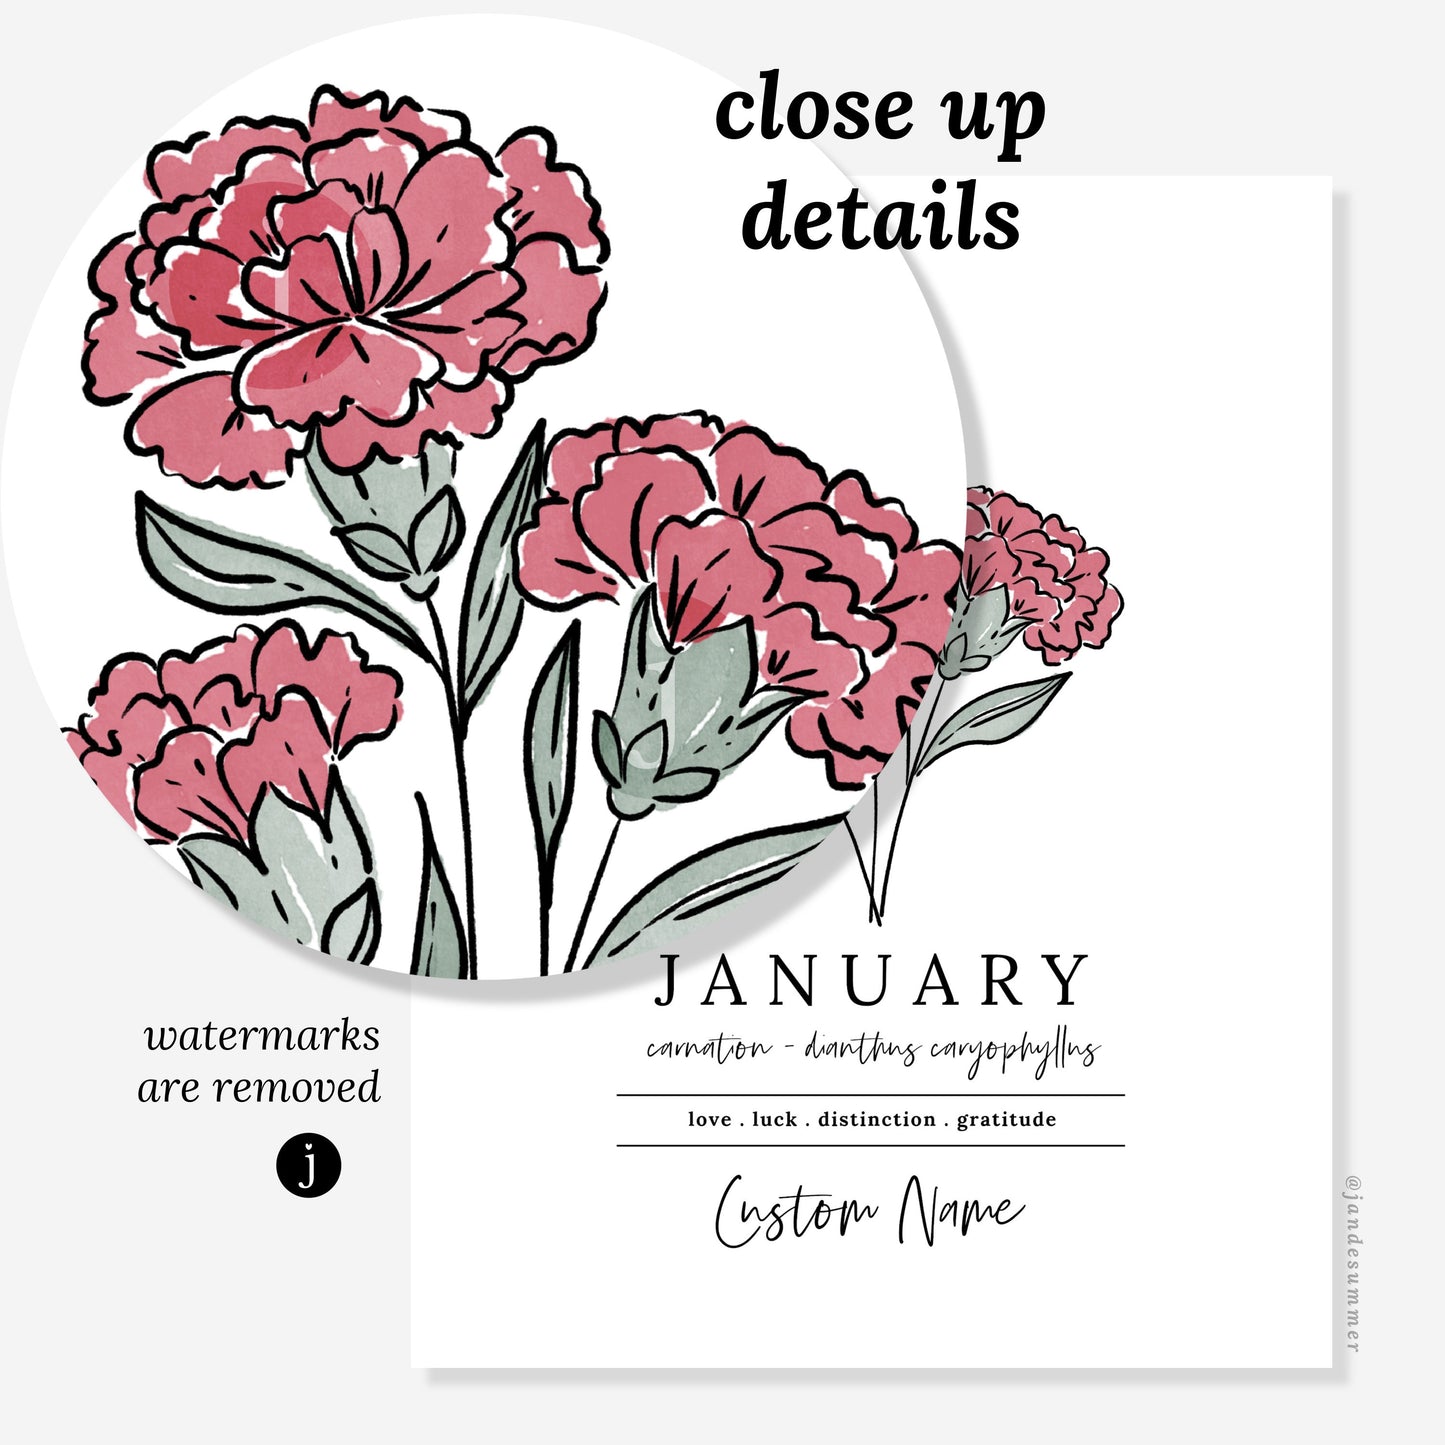 January Red Carnation Birth Flower Personalized Name Unframed Art Print | Gift for Birthdays | Nursery Wall Decor